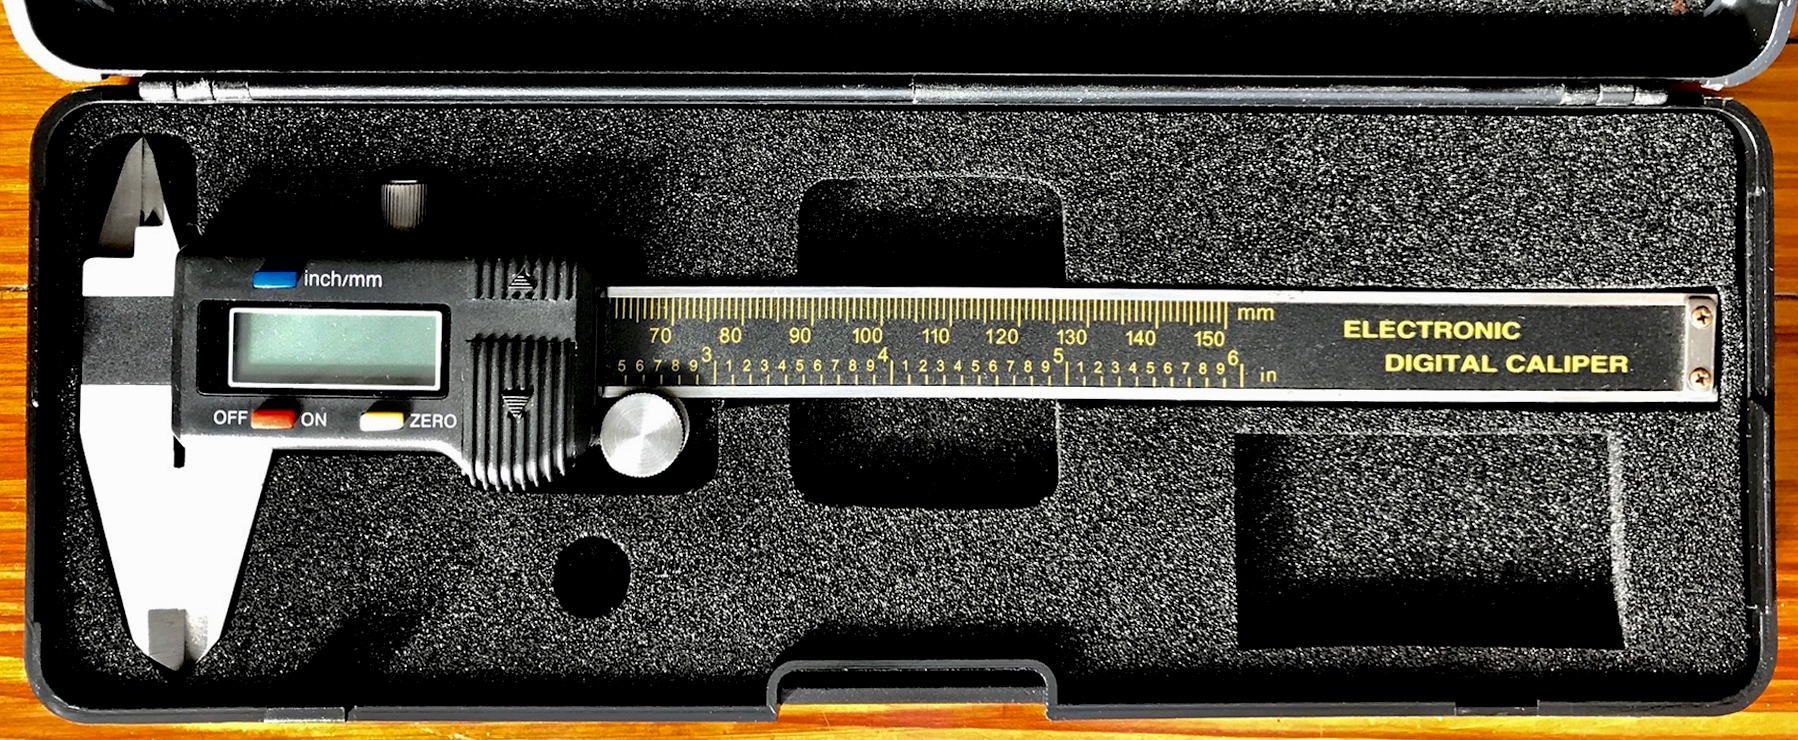 Thickness is measured with a caliper or micrometer, shown above.